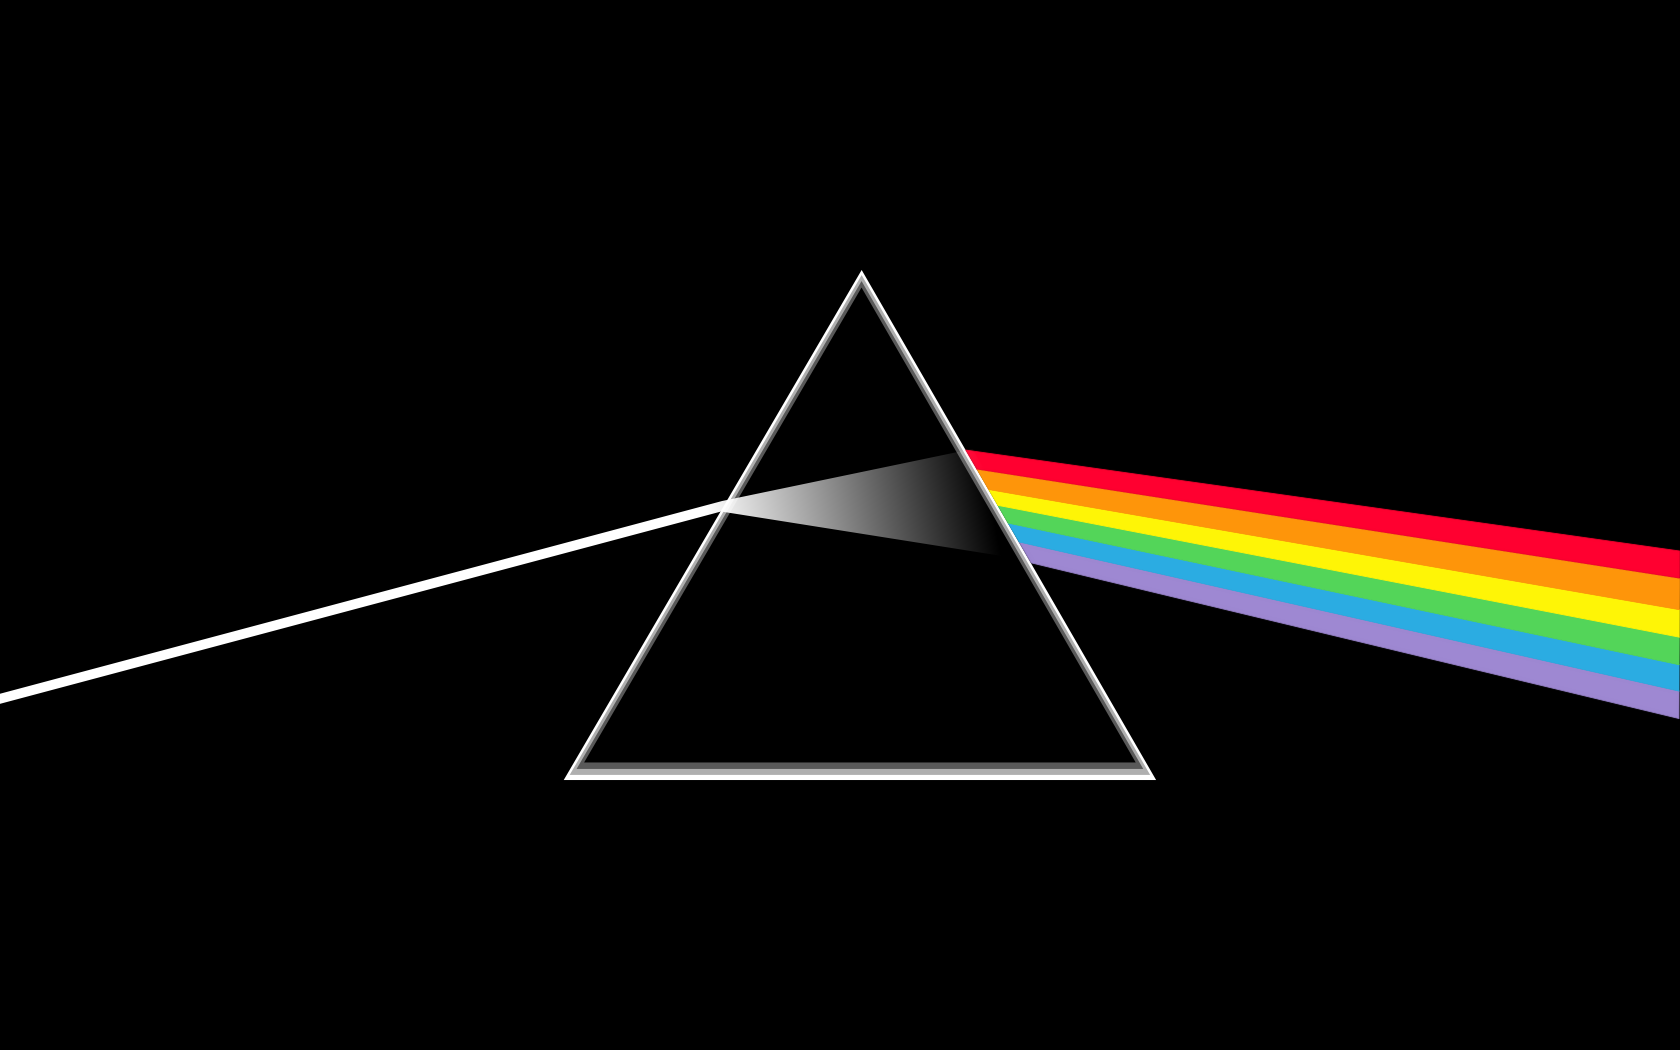 General 1680x1050 Pink Floyd The Dark Side of the Moon dark music triangle simple background black background geometric figures